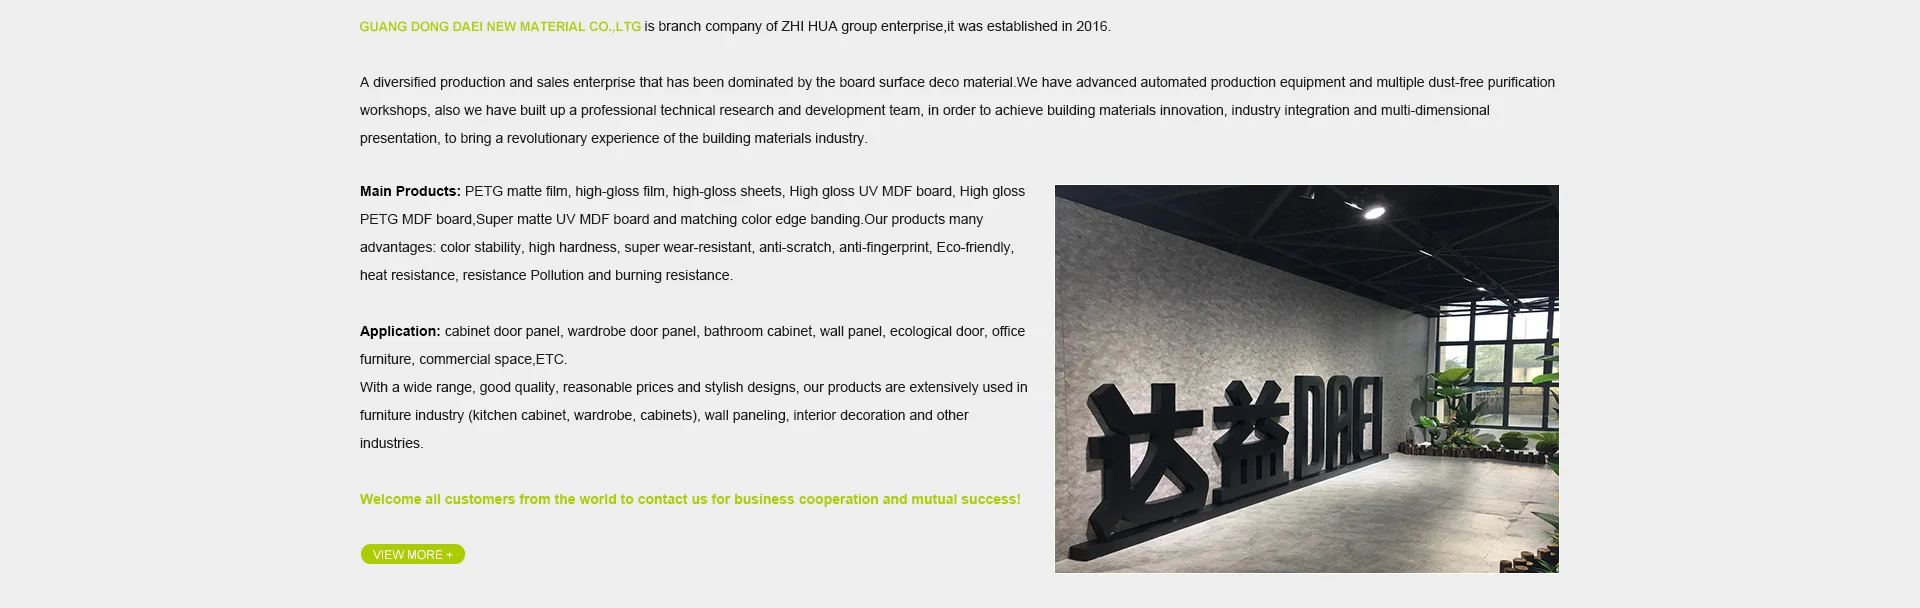 Guangdong DAEI New Material Limited Company - EB film, UV MDF board